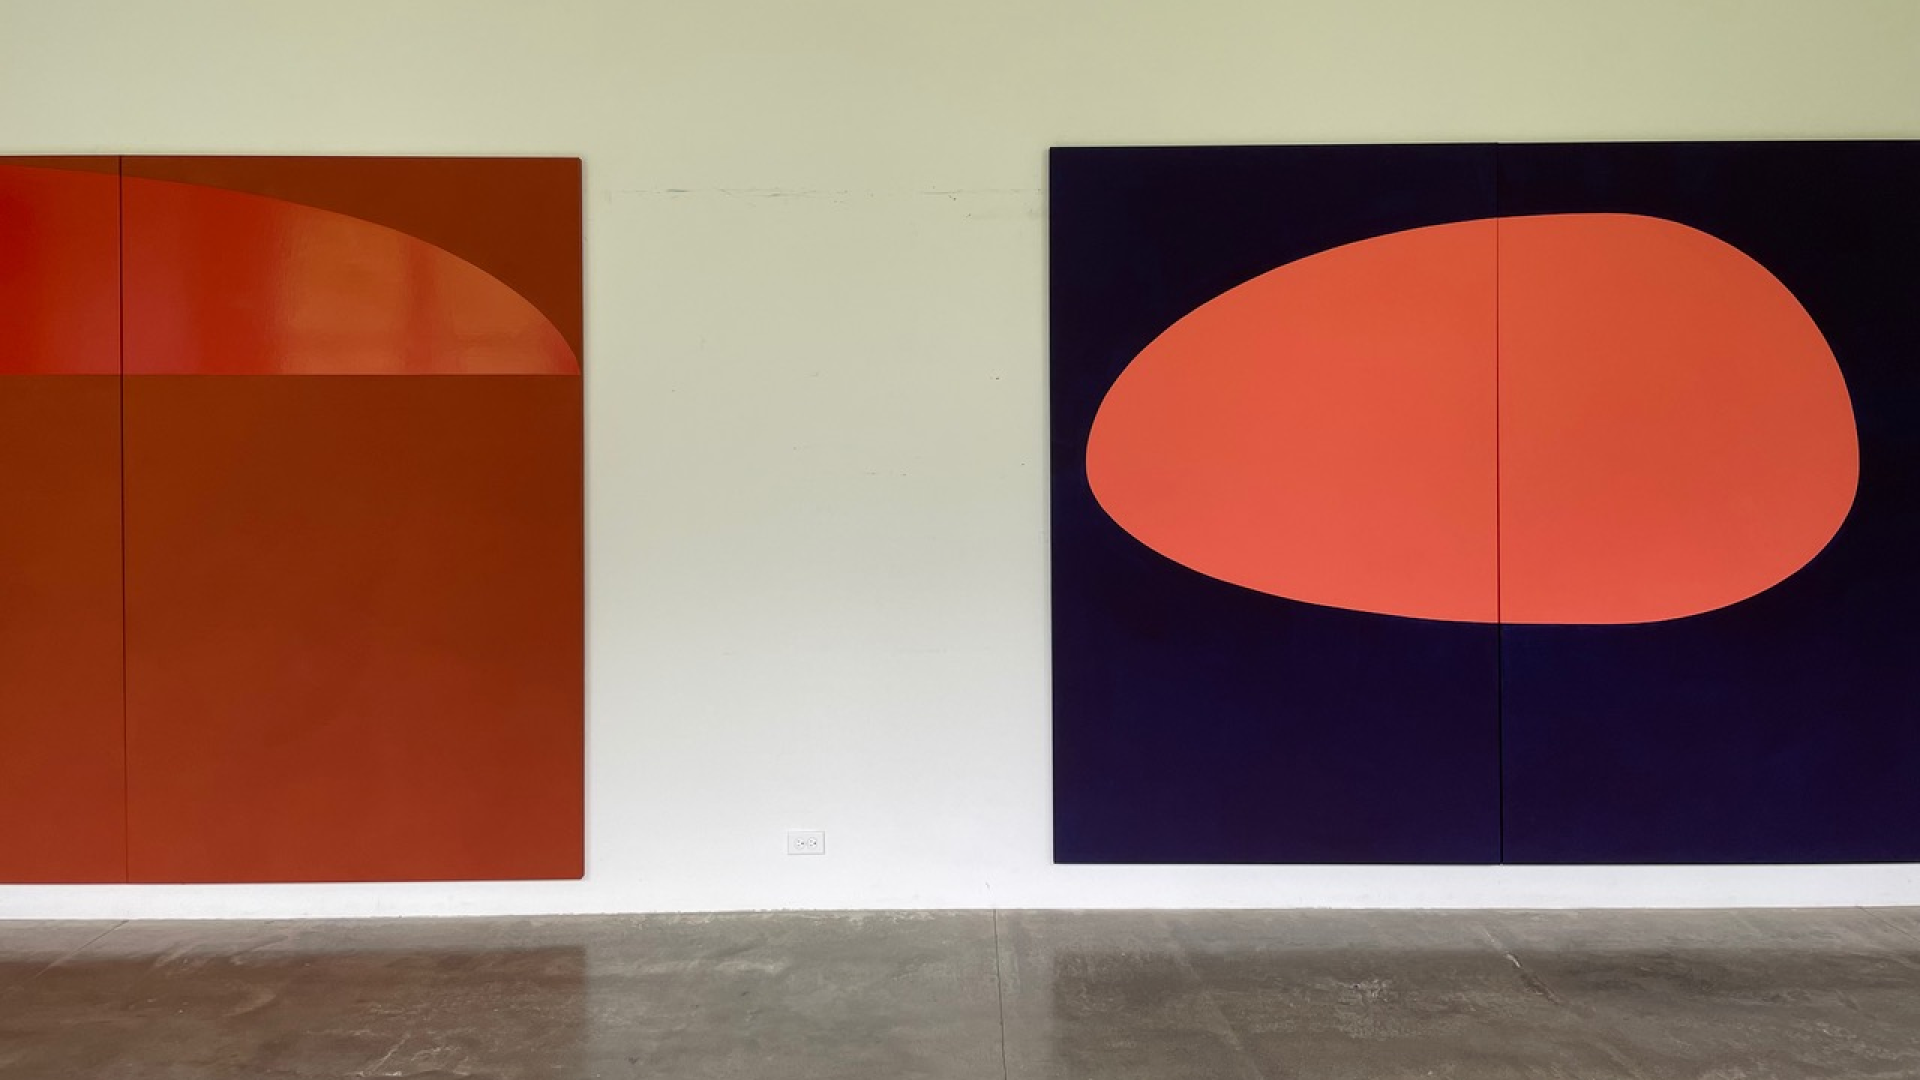 An installation view of two paintings by Suzan Frecon, titled vermilion mummy and dark lumiere, both dated 2020.